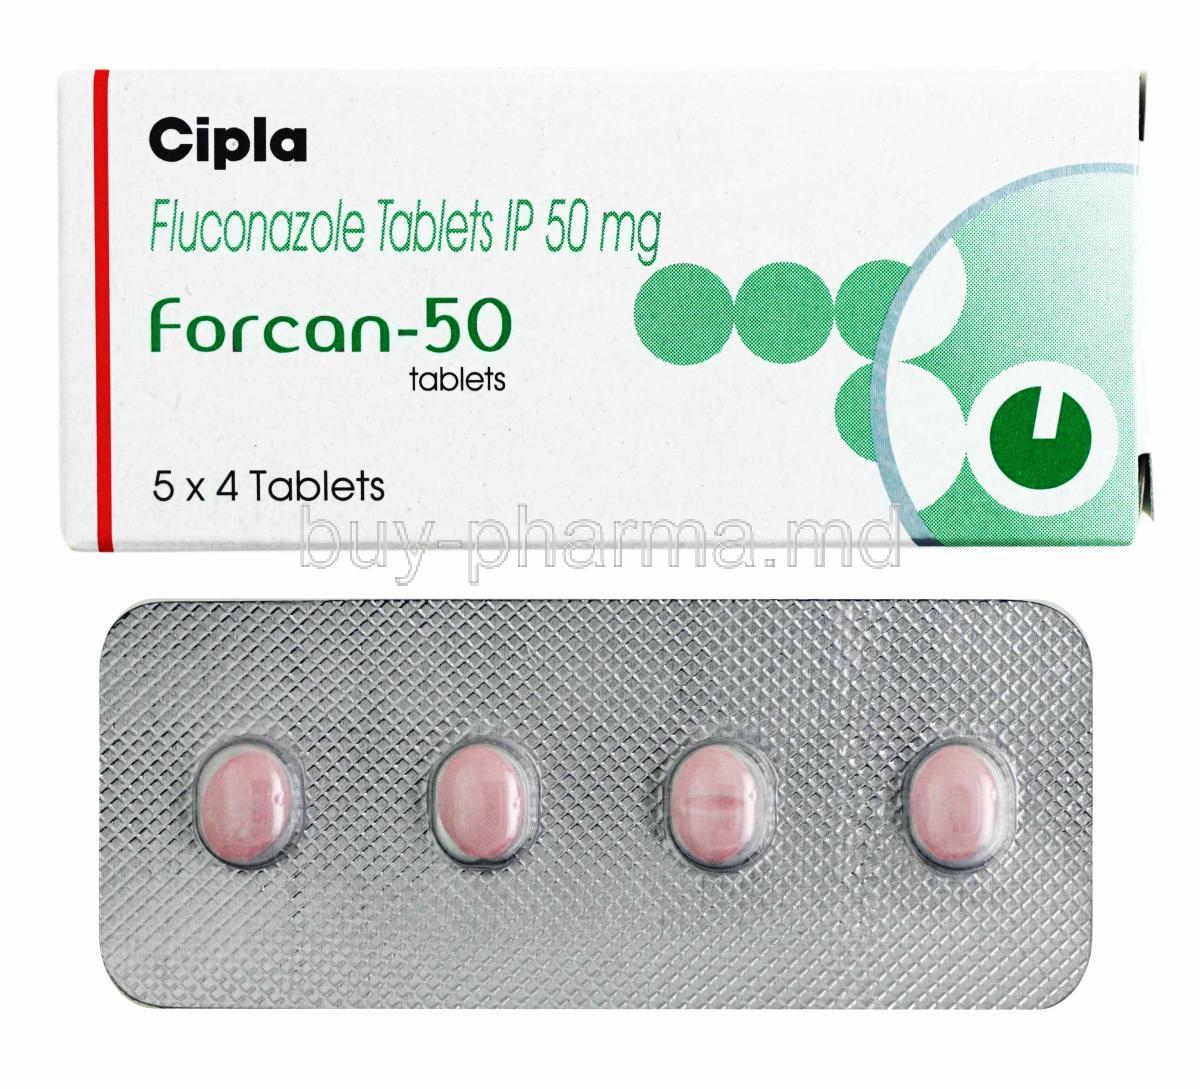 Forcan, Fluconazole 50mg box and tablets